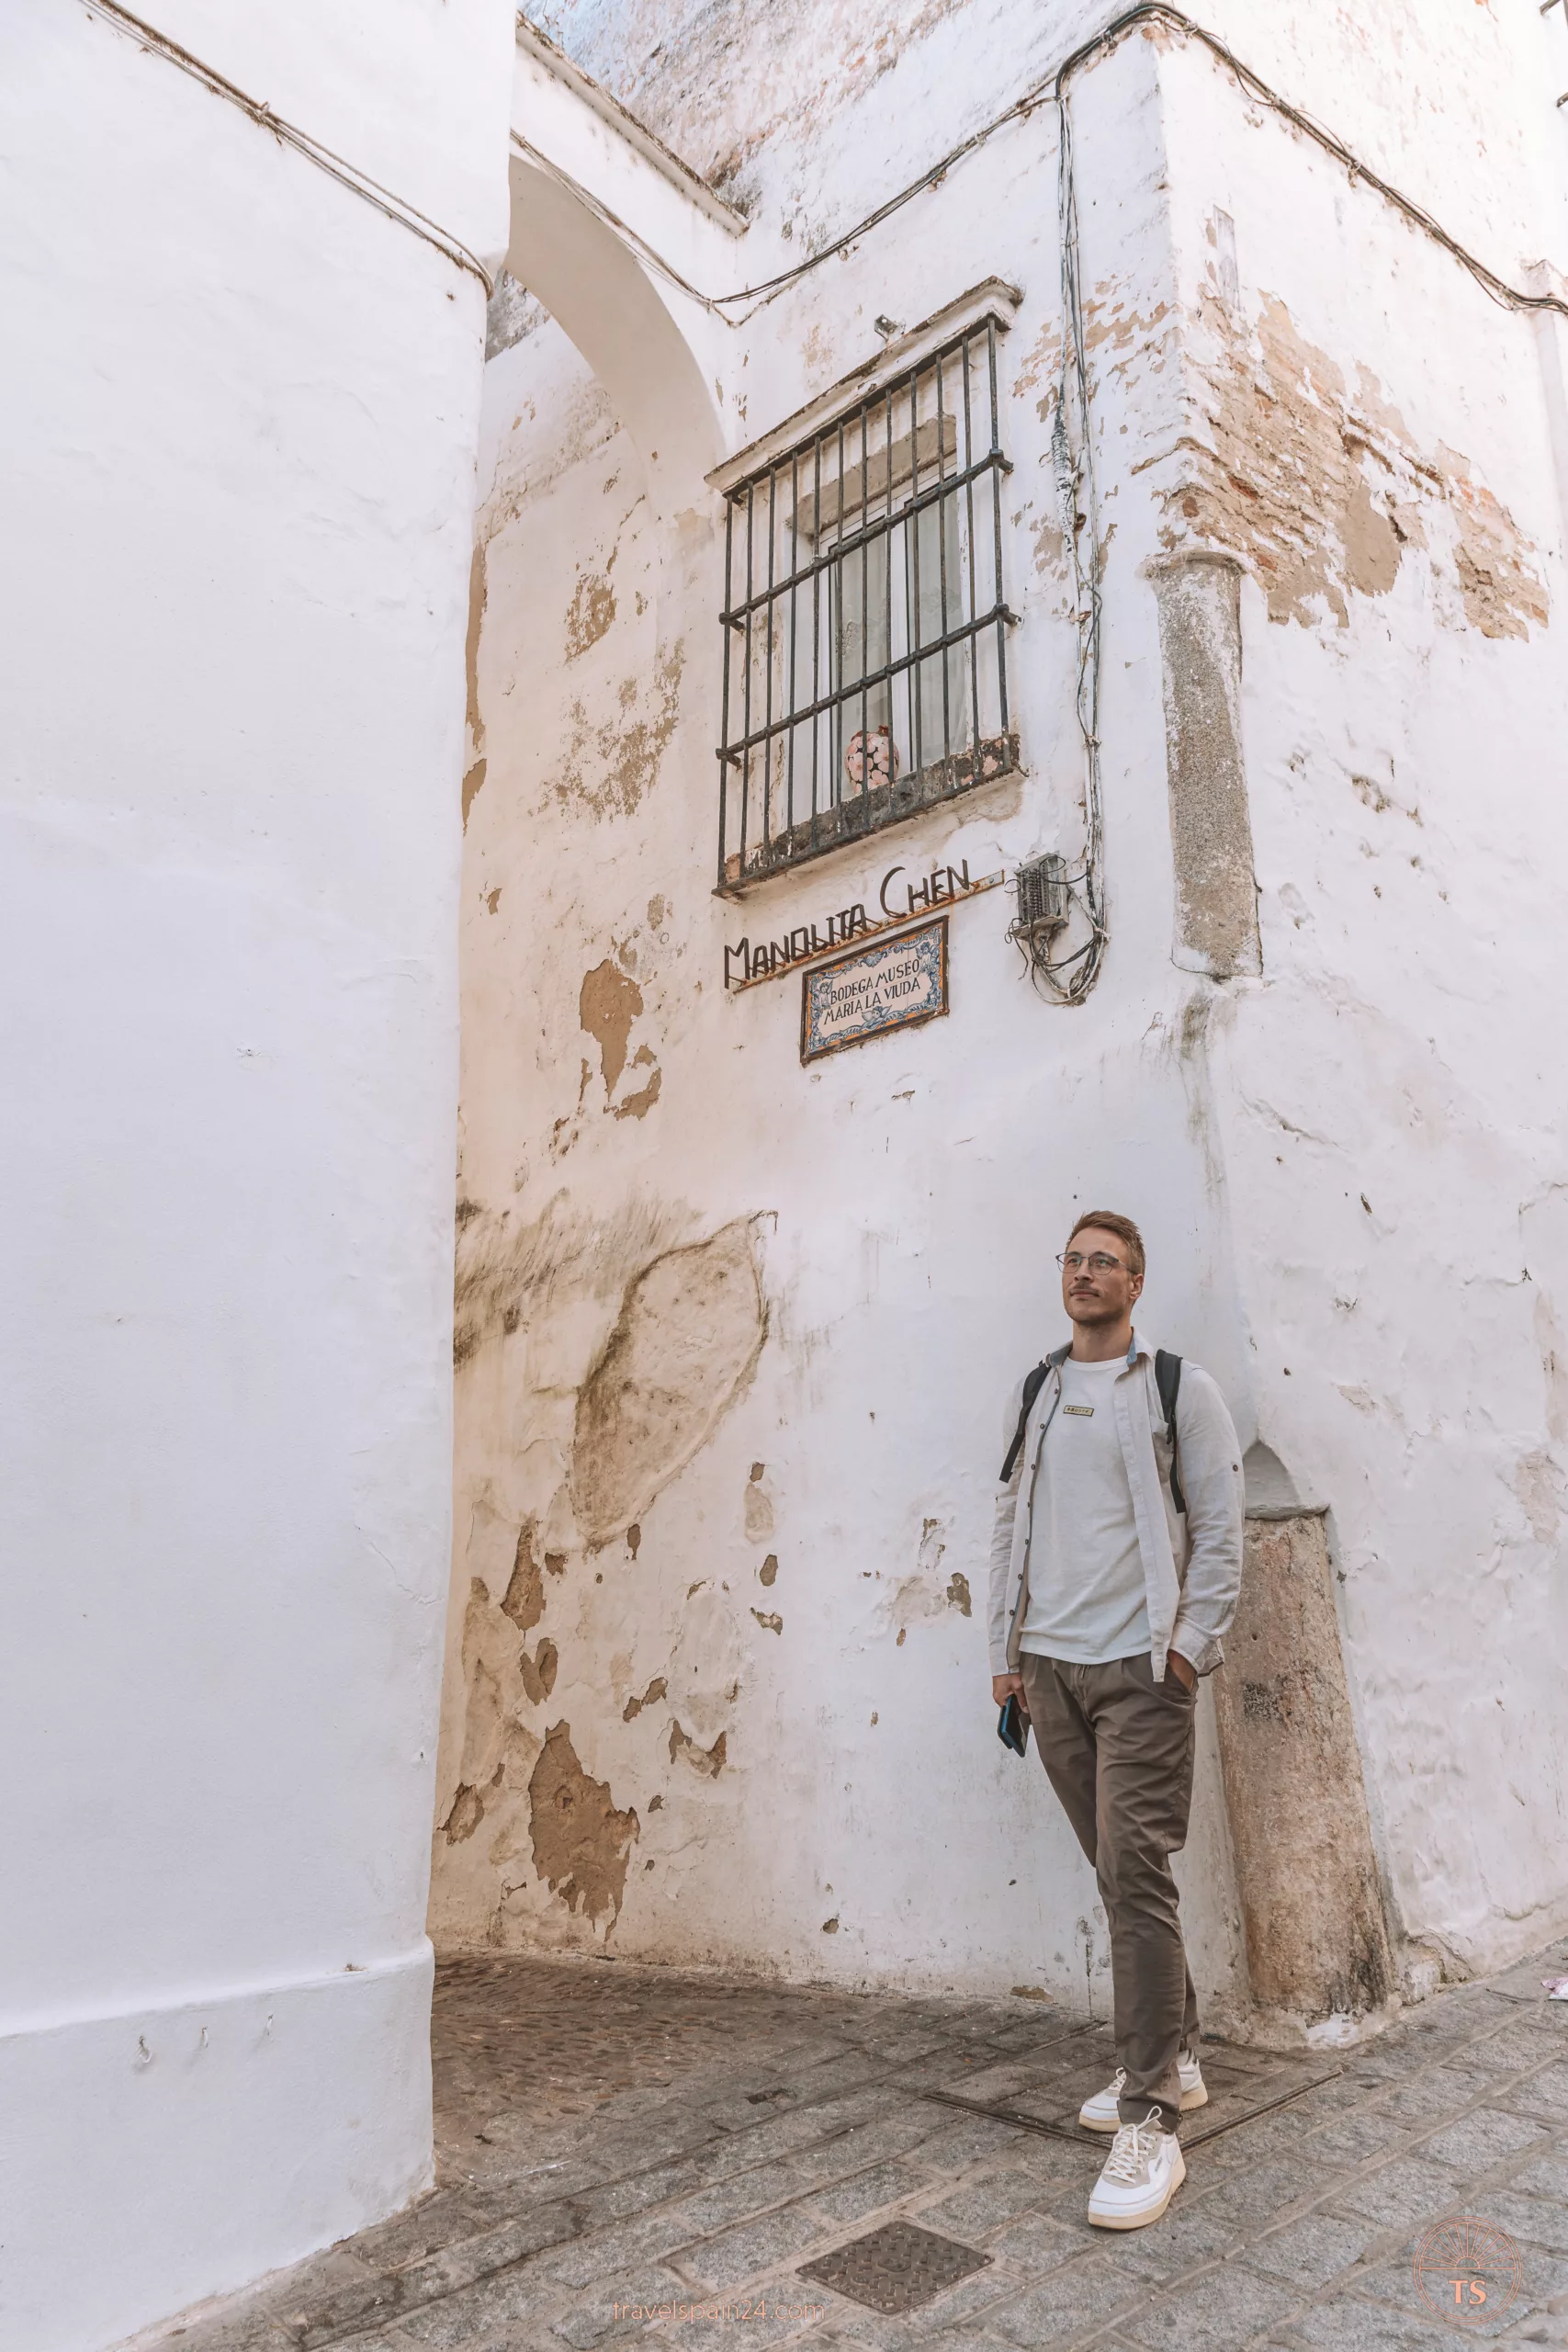 Timon van Basten stands in one of Arcos de la Frontera's charming white alleys. The walls are white, showing chipped cement, reflecting the village's age.